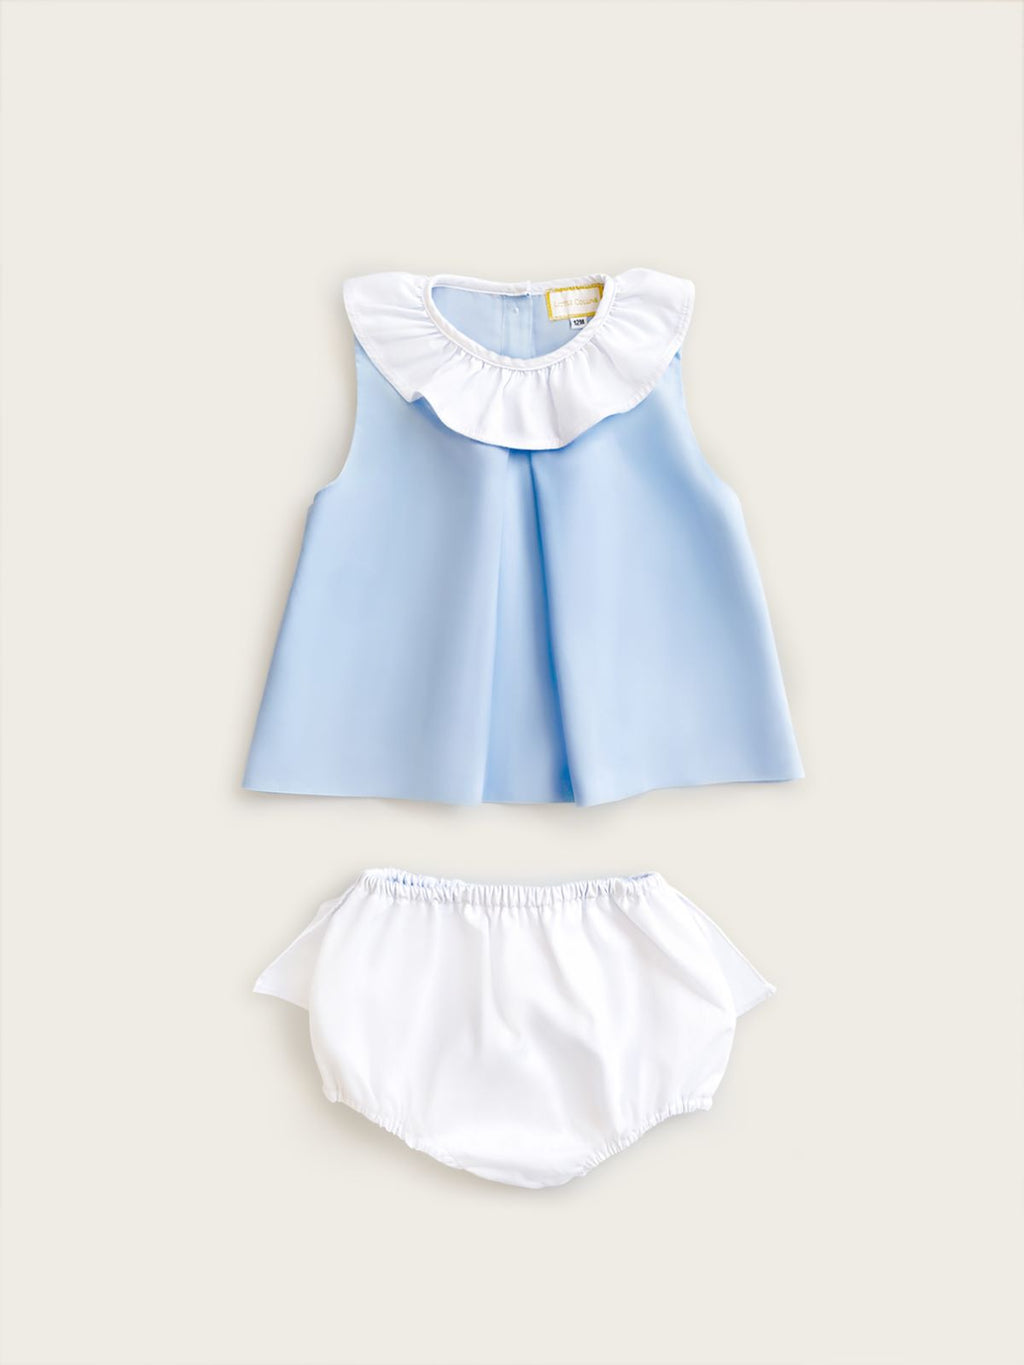 Little Collins Clothing two piece set for girls containing light blue top with white frill and white frilled bloomers front view